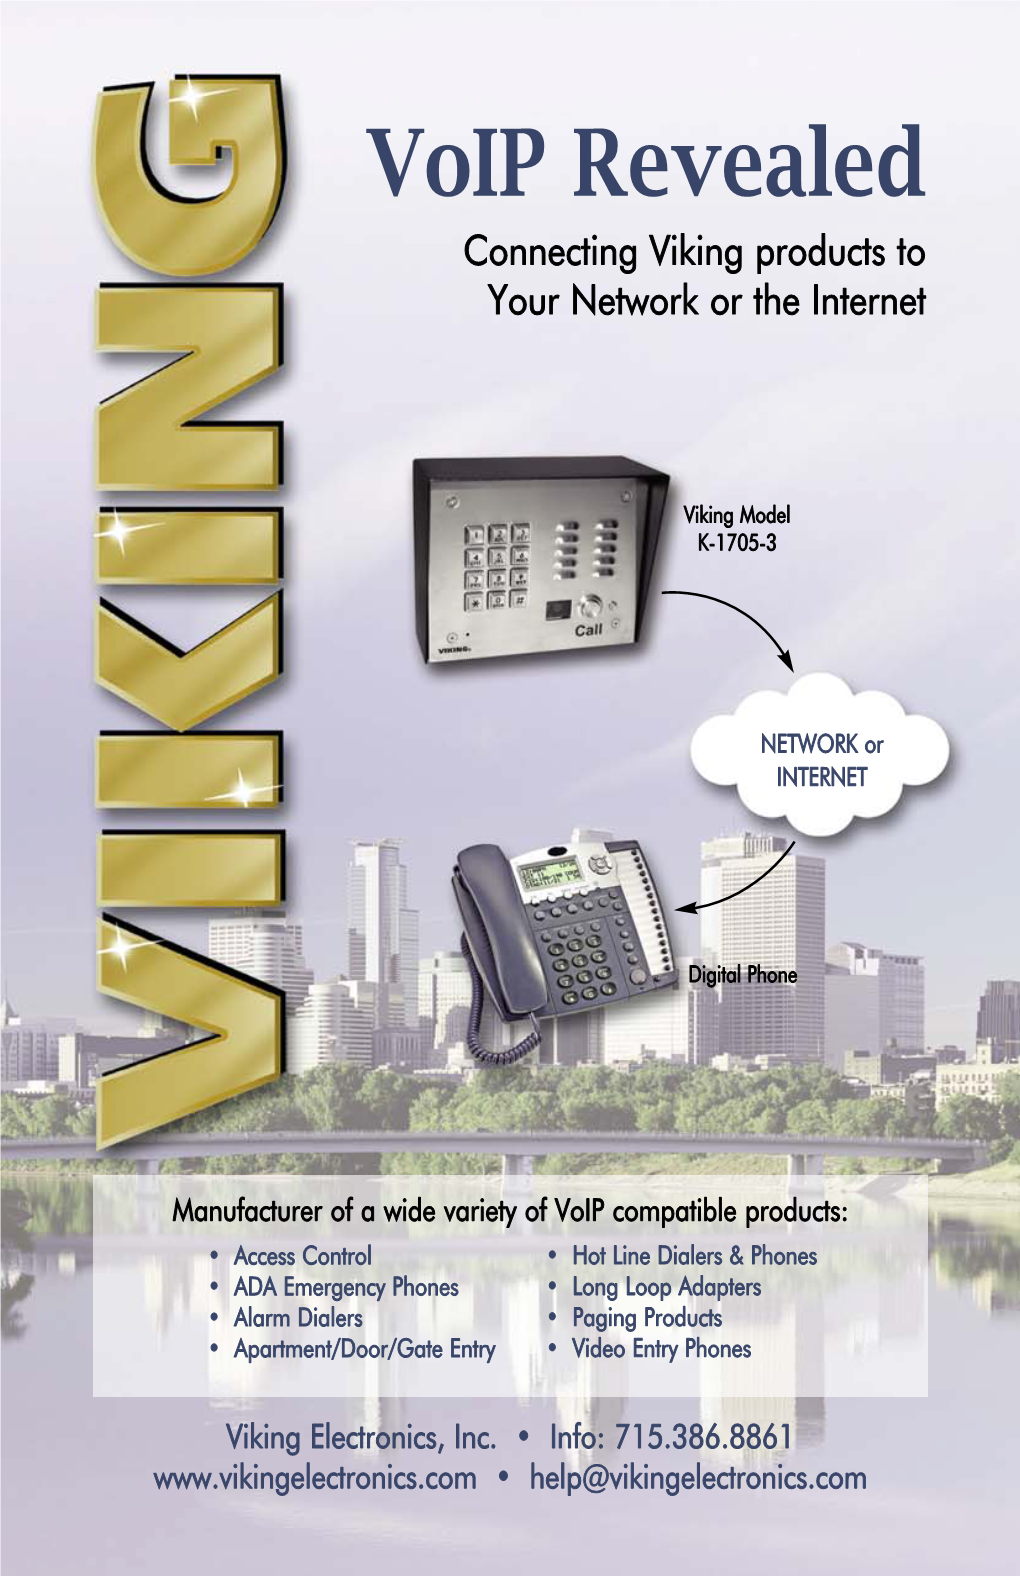 Voip Revealed Connecting Viking Products to Your Network Or the Internet